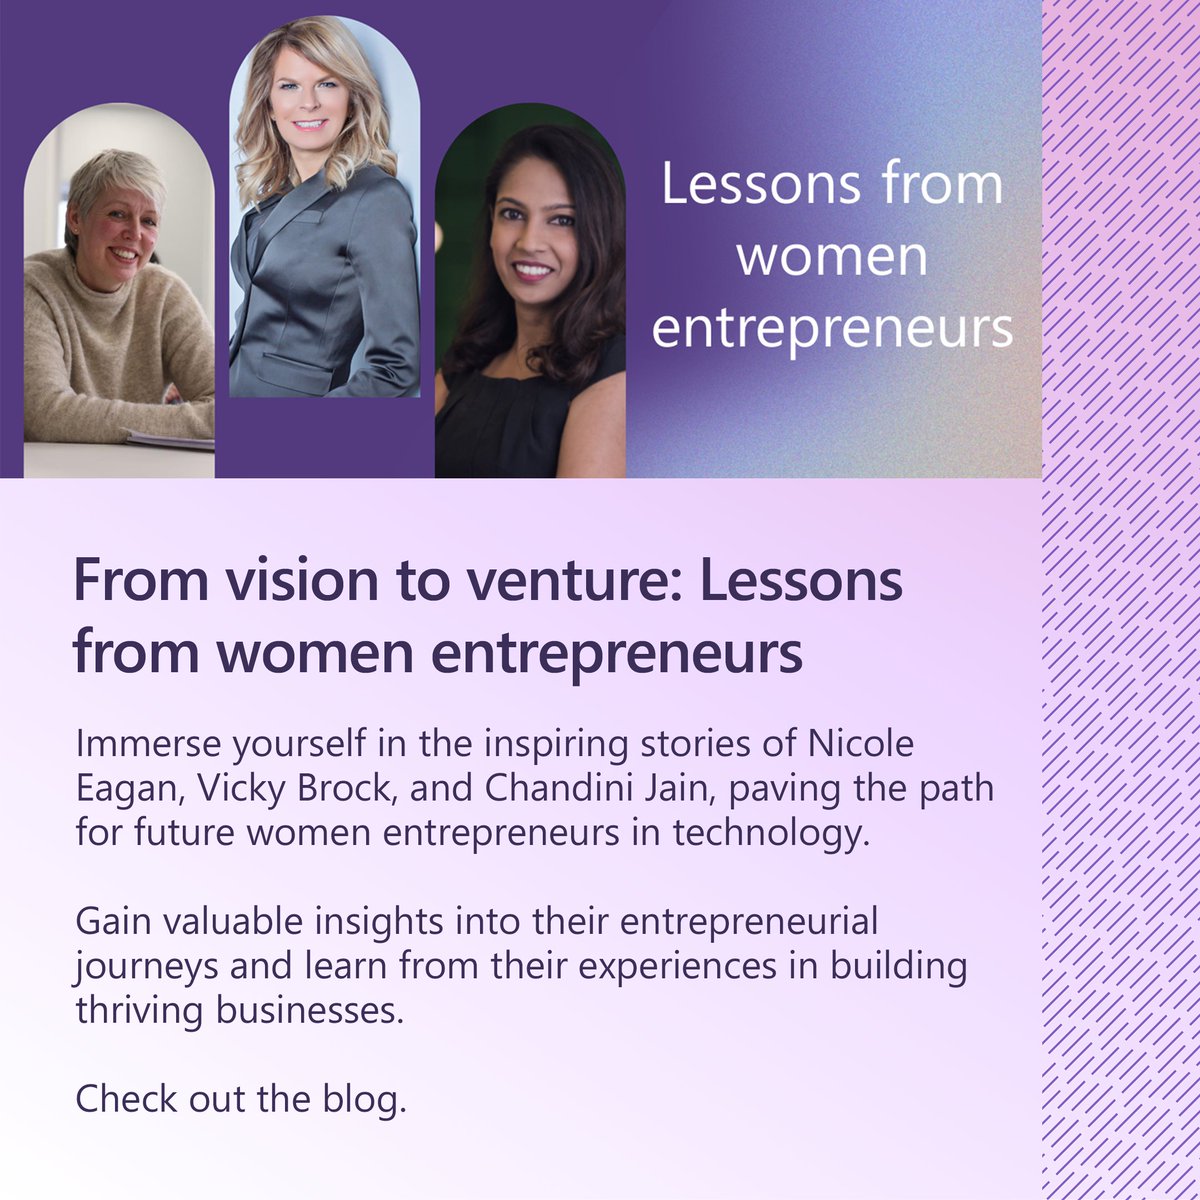 Discover the stories of successful women entrepreneurs Nicole Eagan, Vicky Brock, & @chandinijain, leading the way in tech entrepreneurship. Learn from their successes, challenges, & lessons as they share their journeys building businesses. Read more: msft.it/6013YuO0h